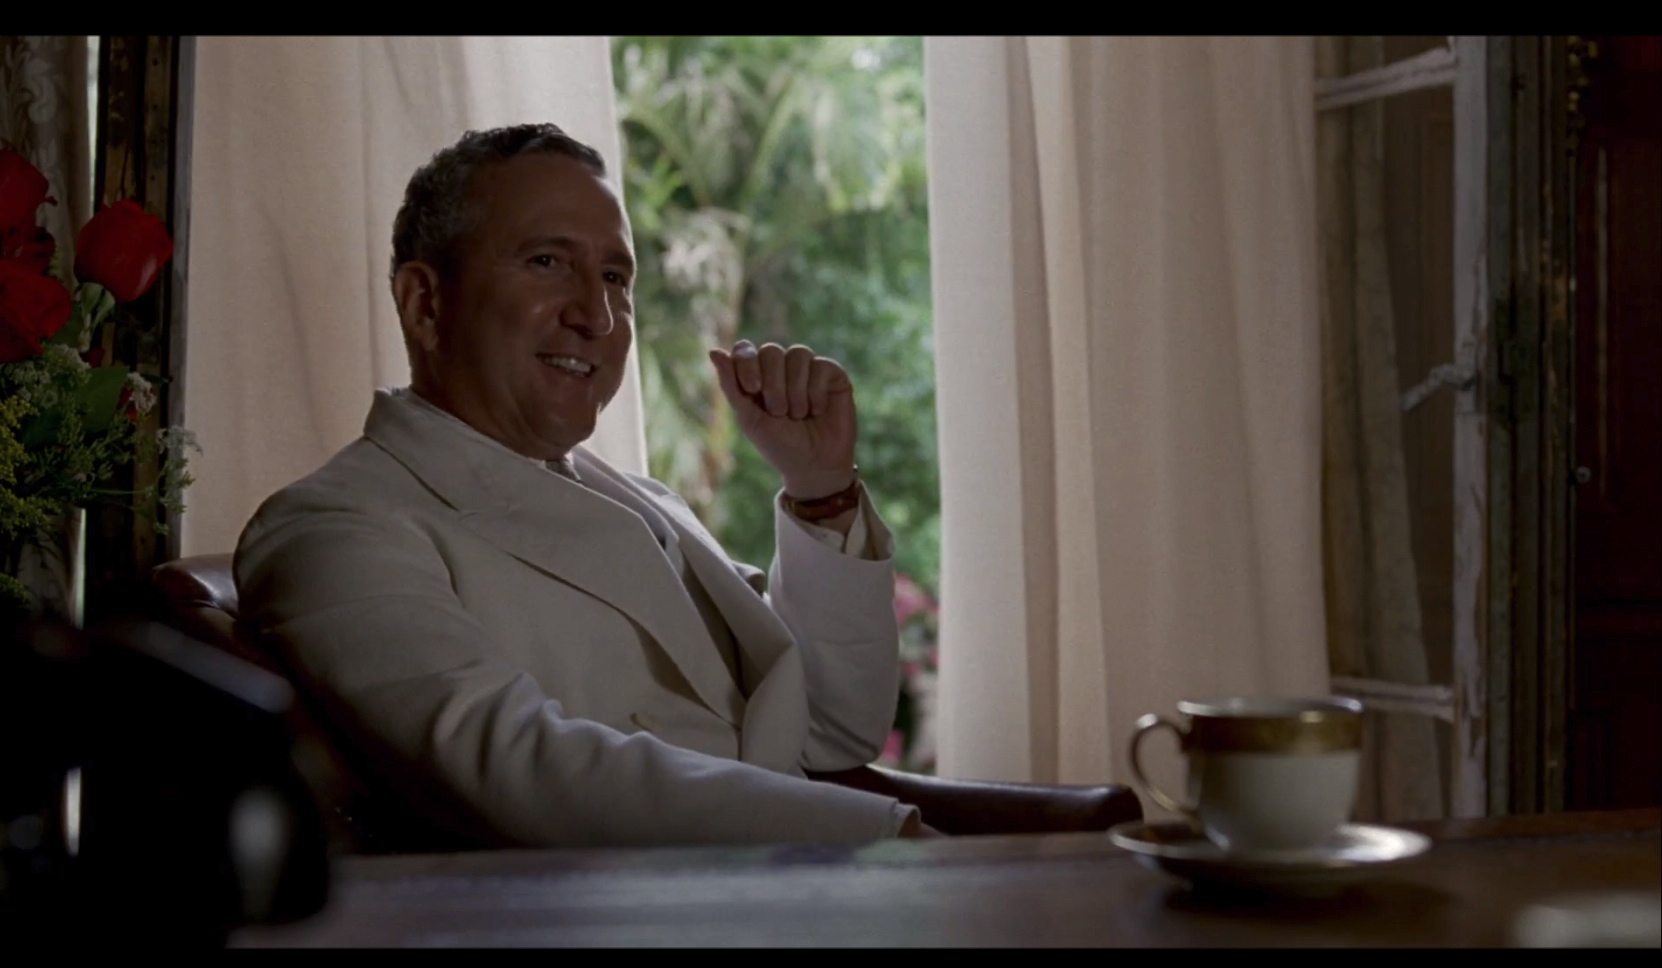 Jorge Pupo as The Bank Manager on Boardwalk Empire on HBO. Season 5, Episode 4, Cuanto. Directed by Jake Paltrow